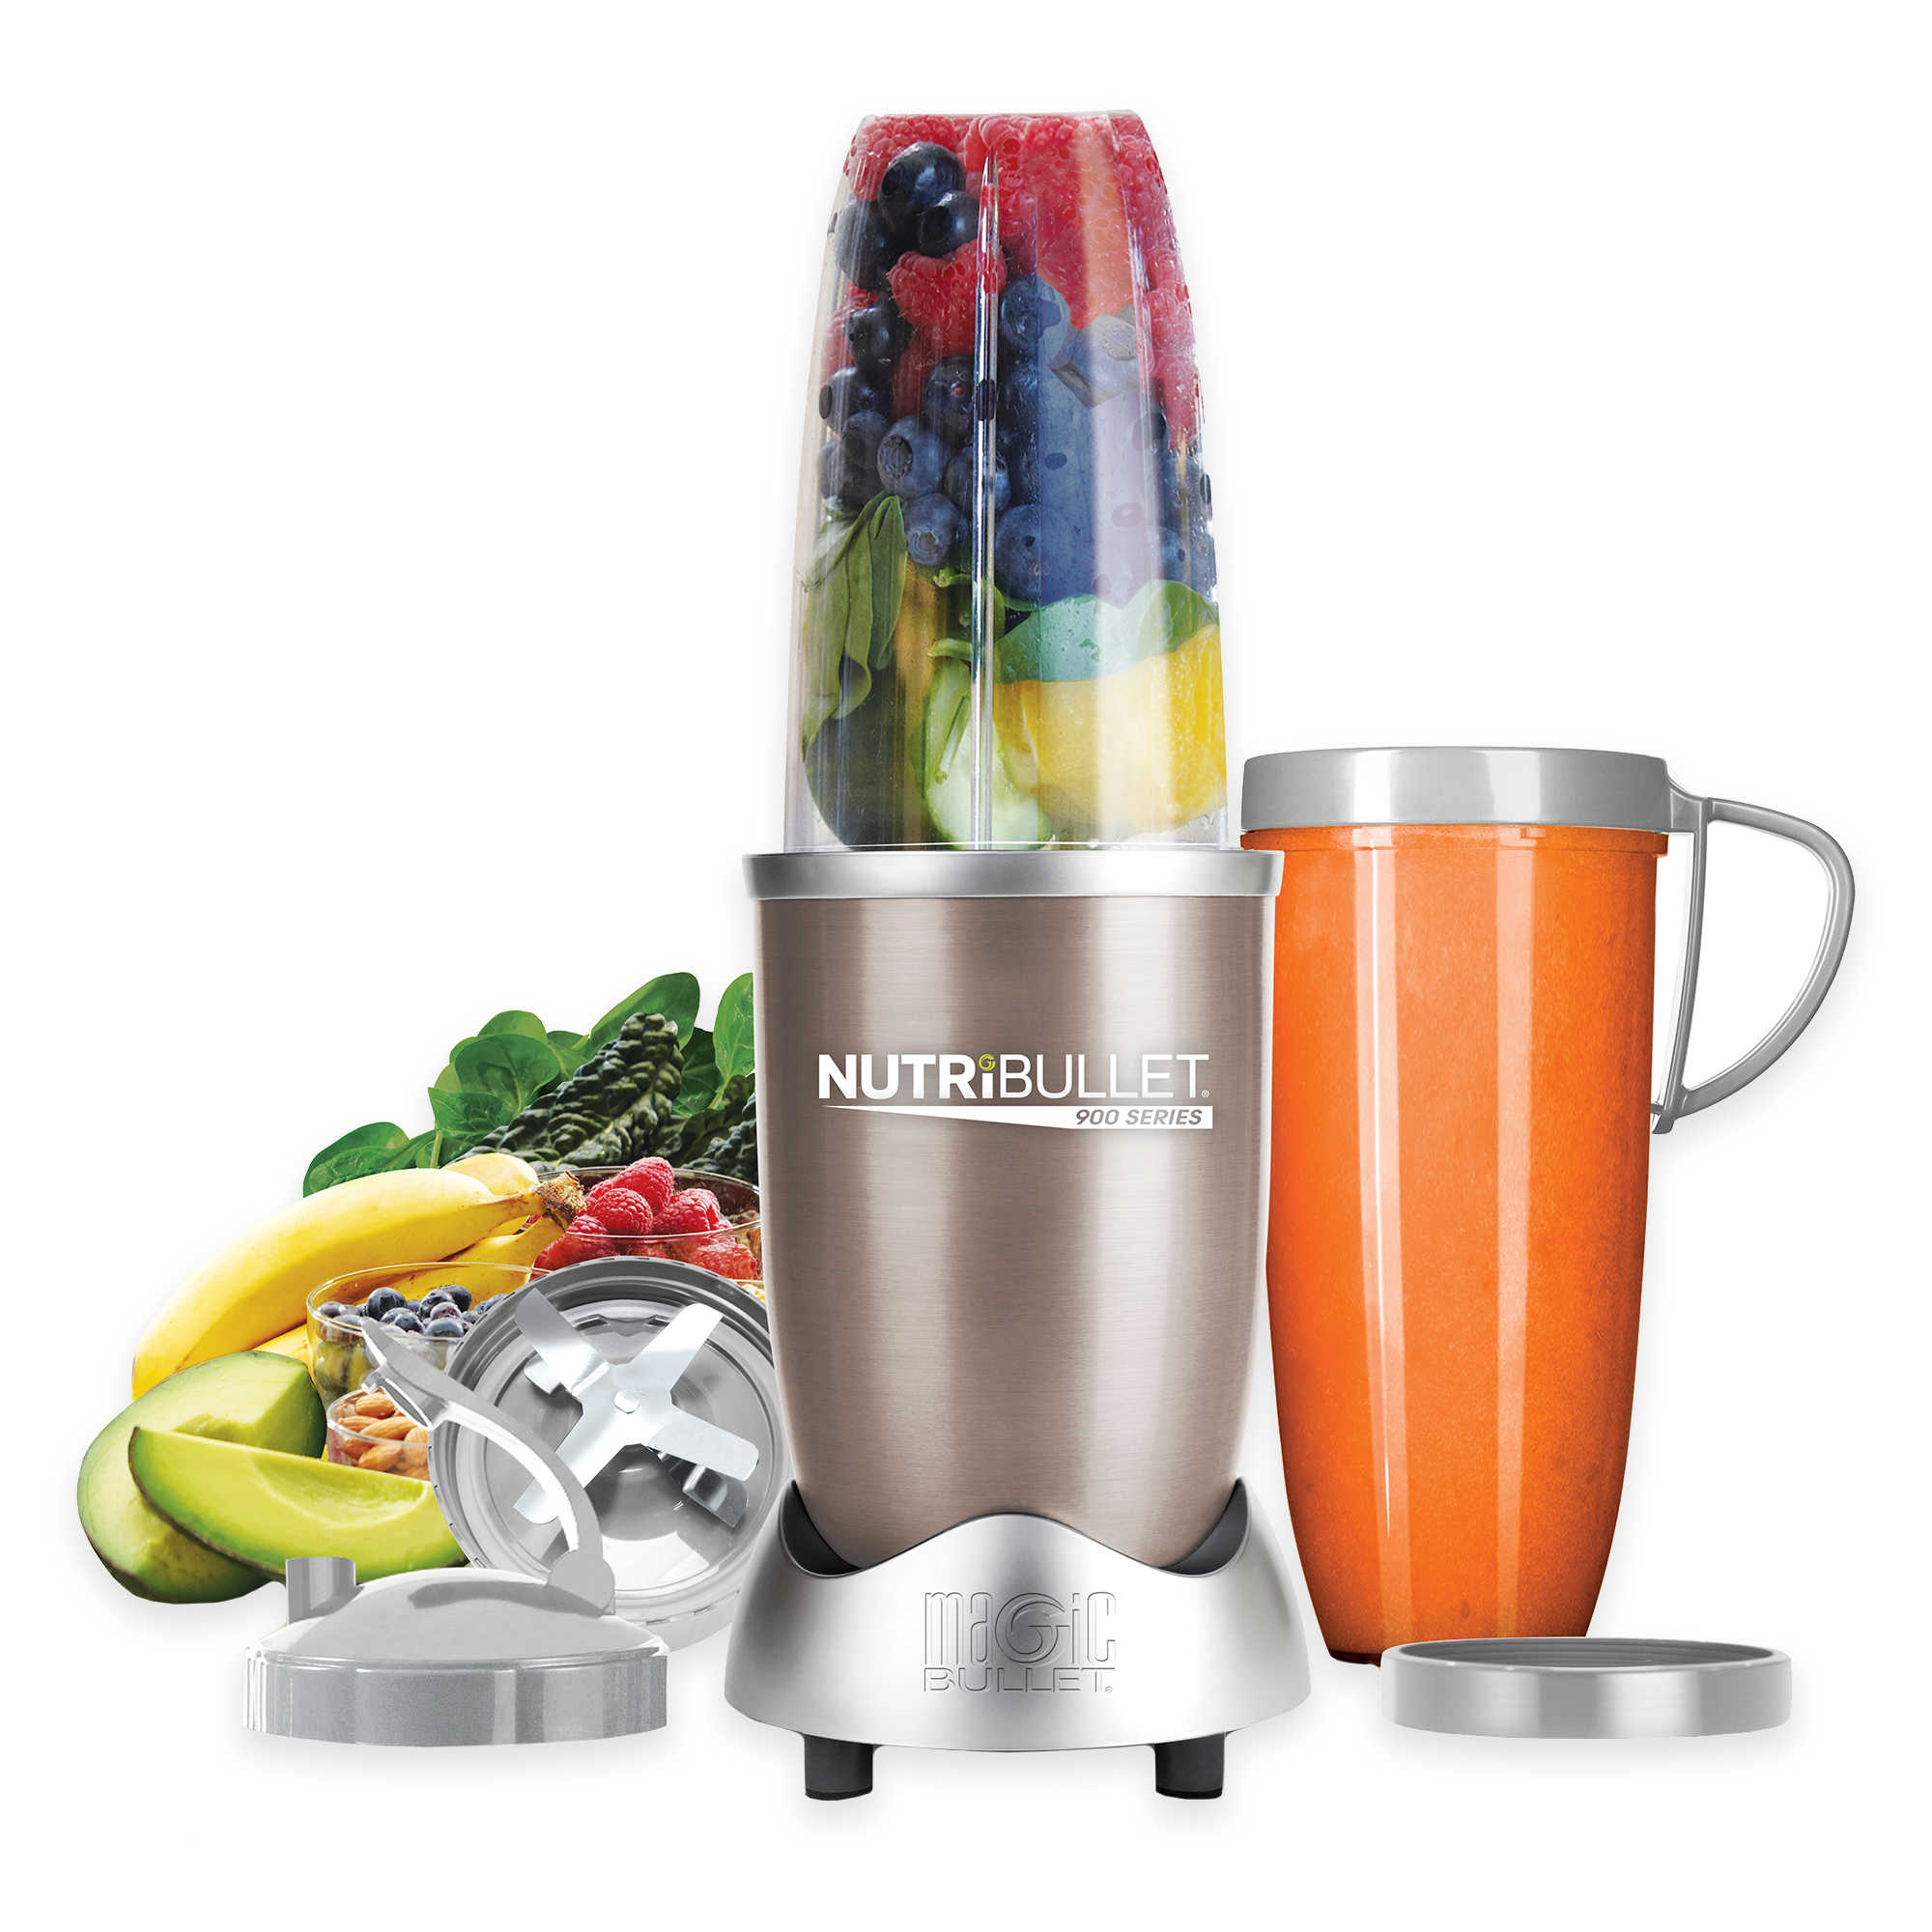 nutribullet-pro-super-beauty-product-restock-quality-top